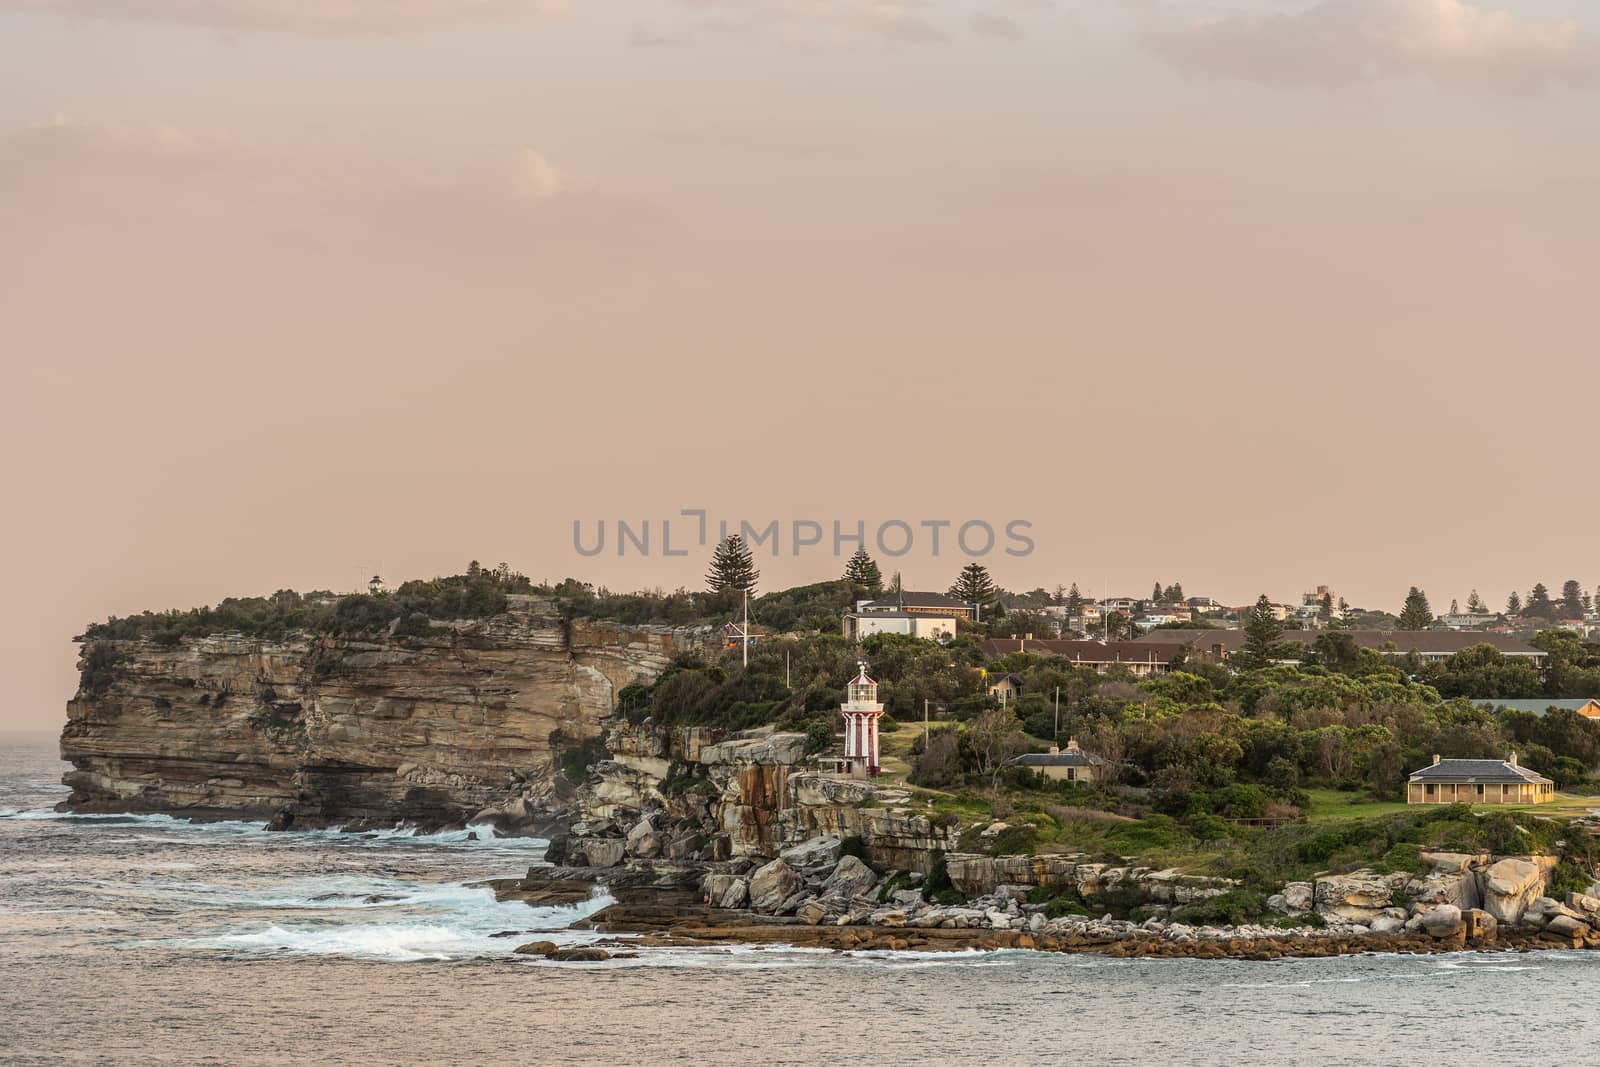 Sydney, Australia - February 12, 2019: South Head cliffs at gate between Tasman Sea and Sydney Bay during sunset. Cloudless pale sky. Gray water. Crashing waves. Warm brown rocks, Hornby lighthouse.